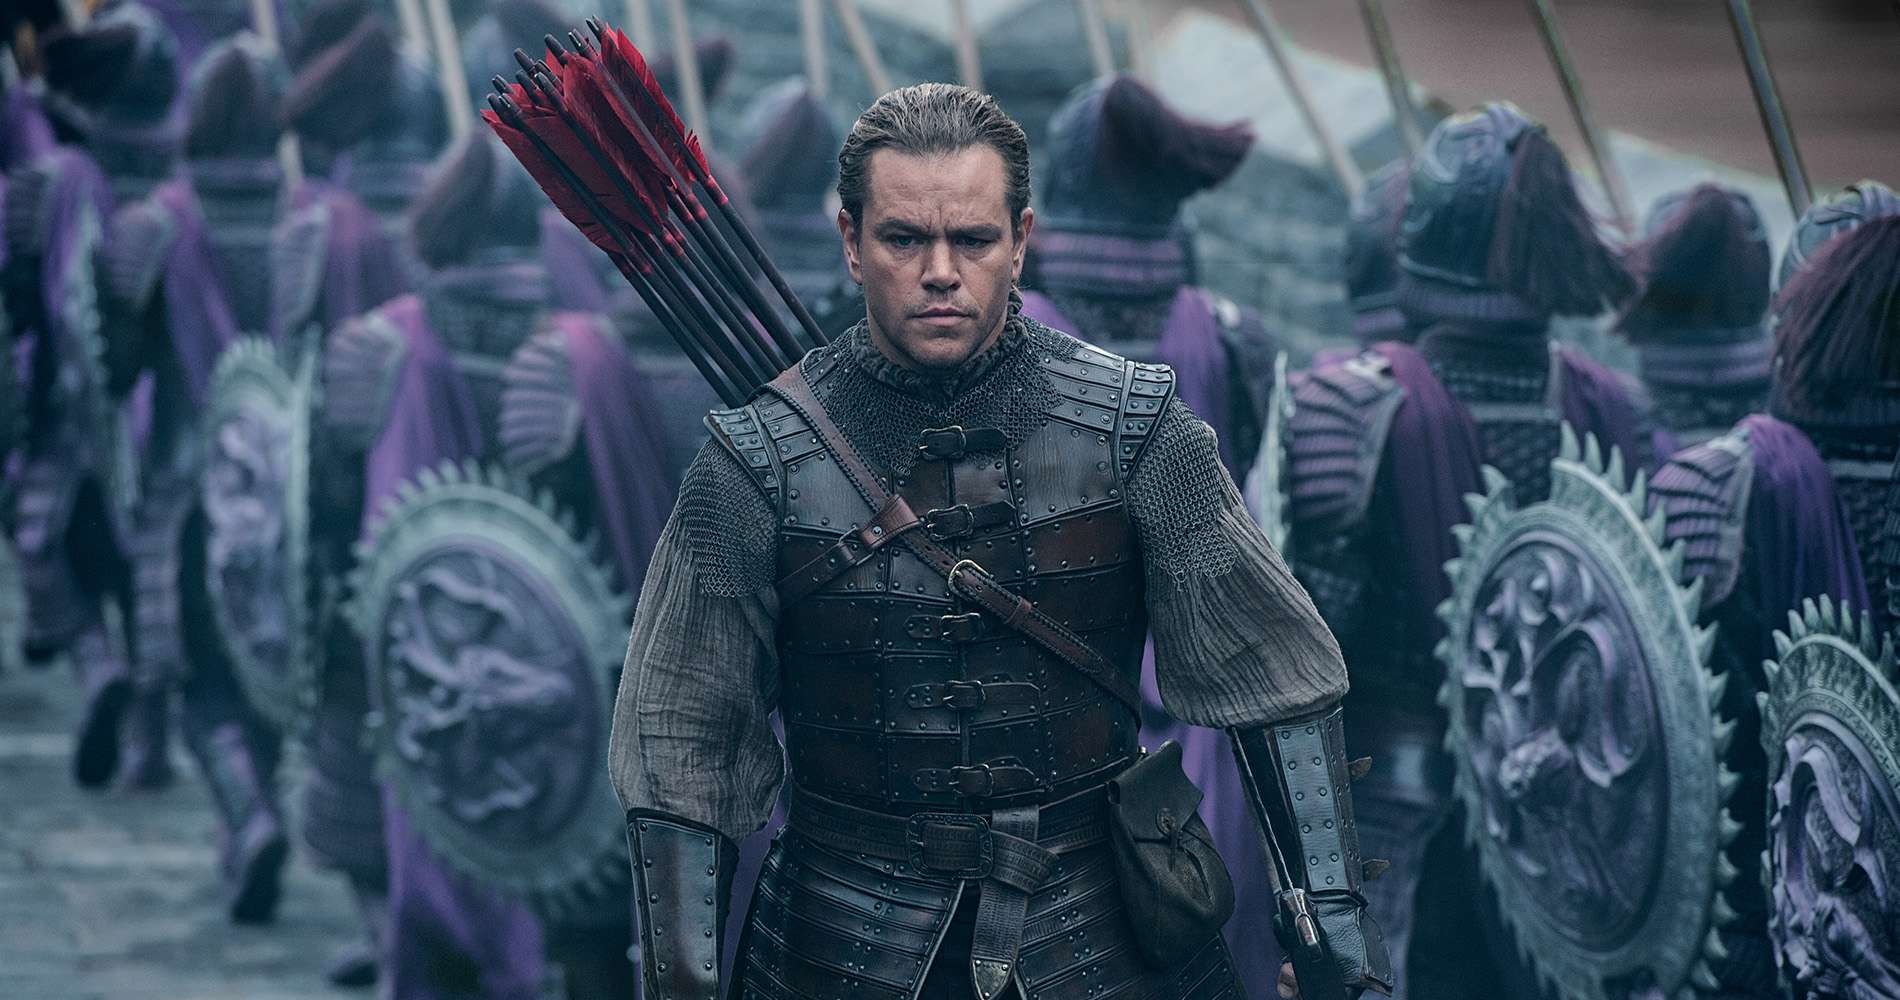 Matt Damon plays European mercenary William Garin in Zhang Yimou’s ‘The Great Wall’, a casting choice that has sparked criticism about ‘whitewashing’. Photo: TNS